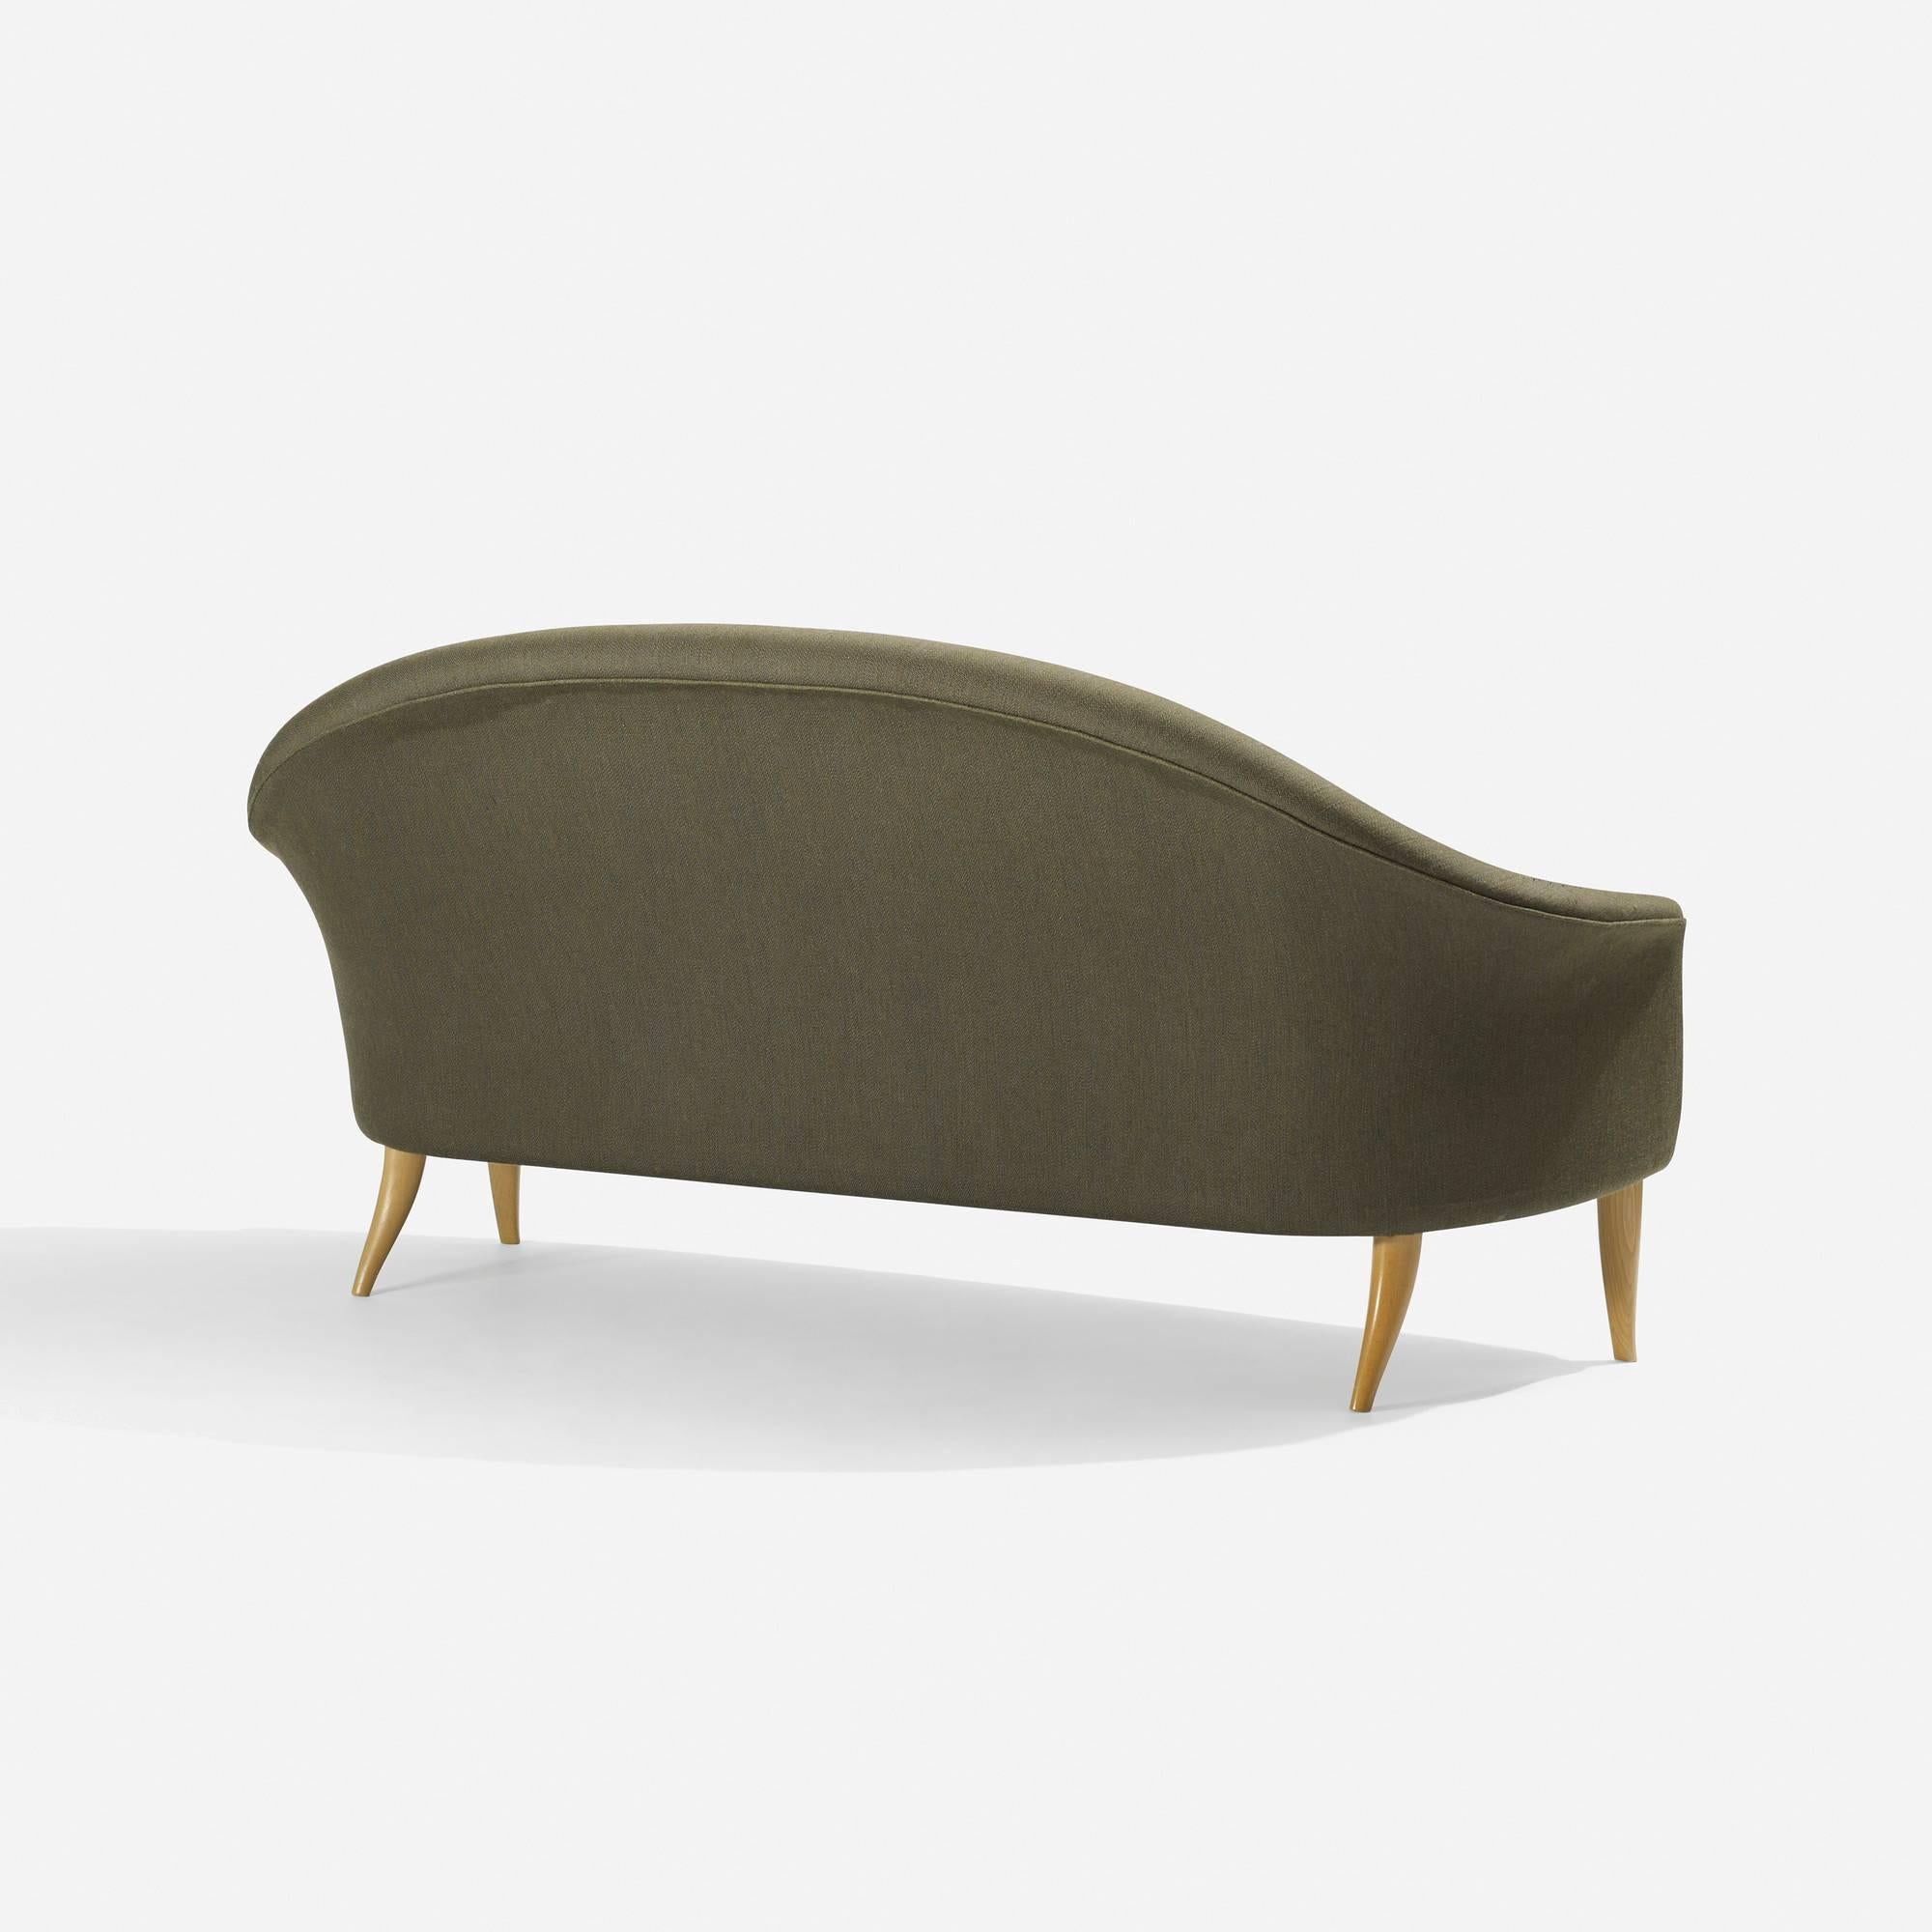 Paradise sofa by Kerstin Hörlin-Holmquist, upholstered button tufted tight back with exposed Beech wood legs. Signed with applied foil manufacturer's label on underside.